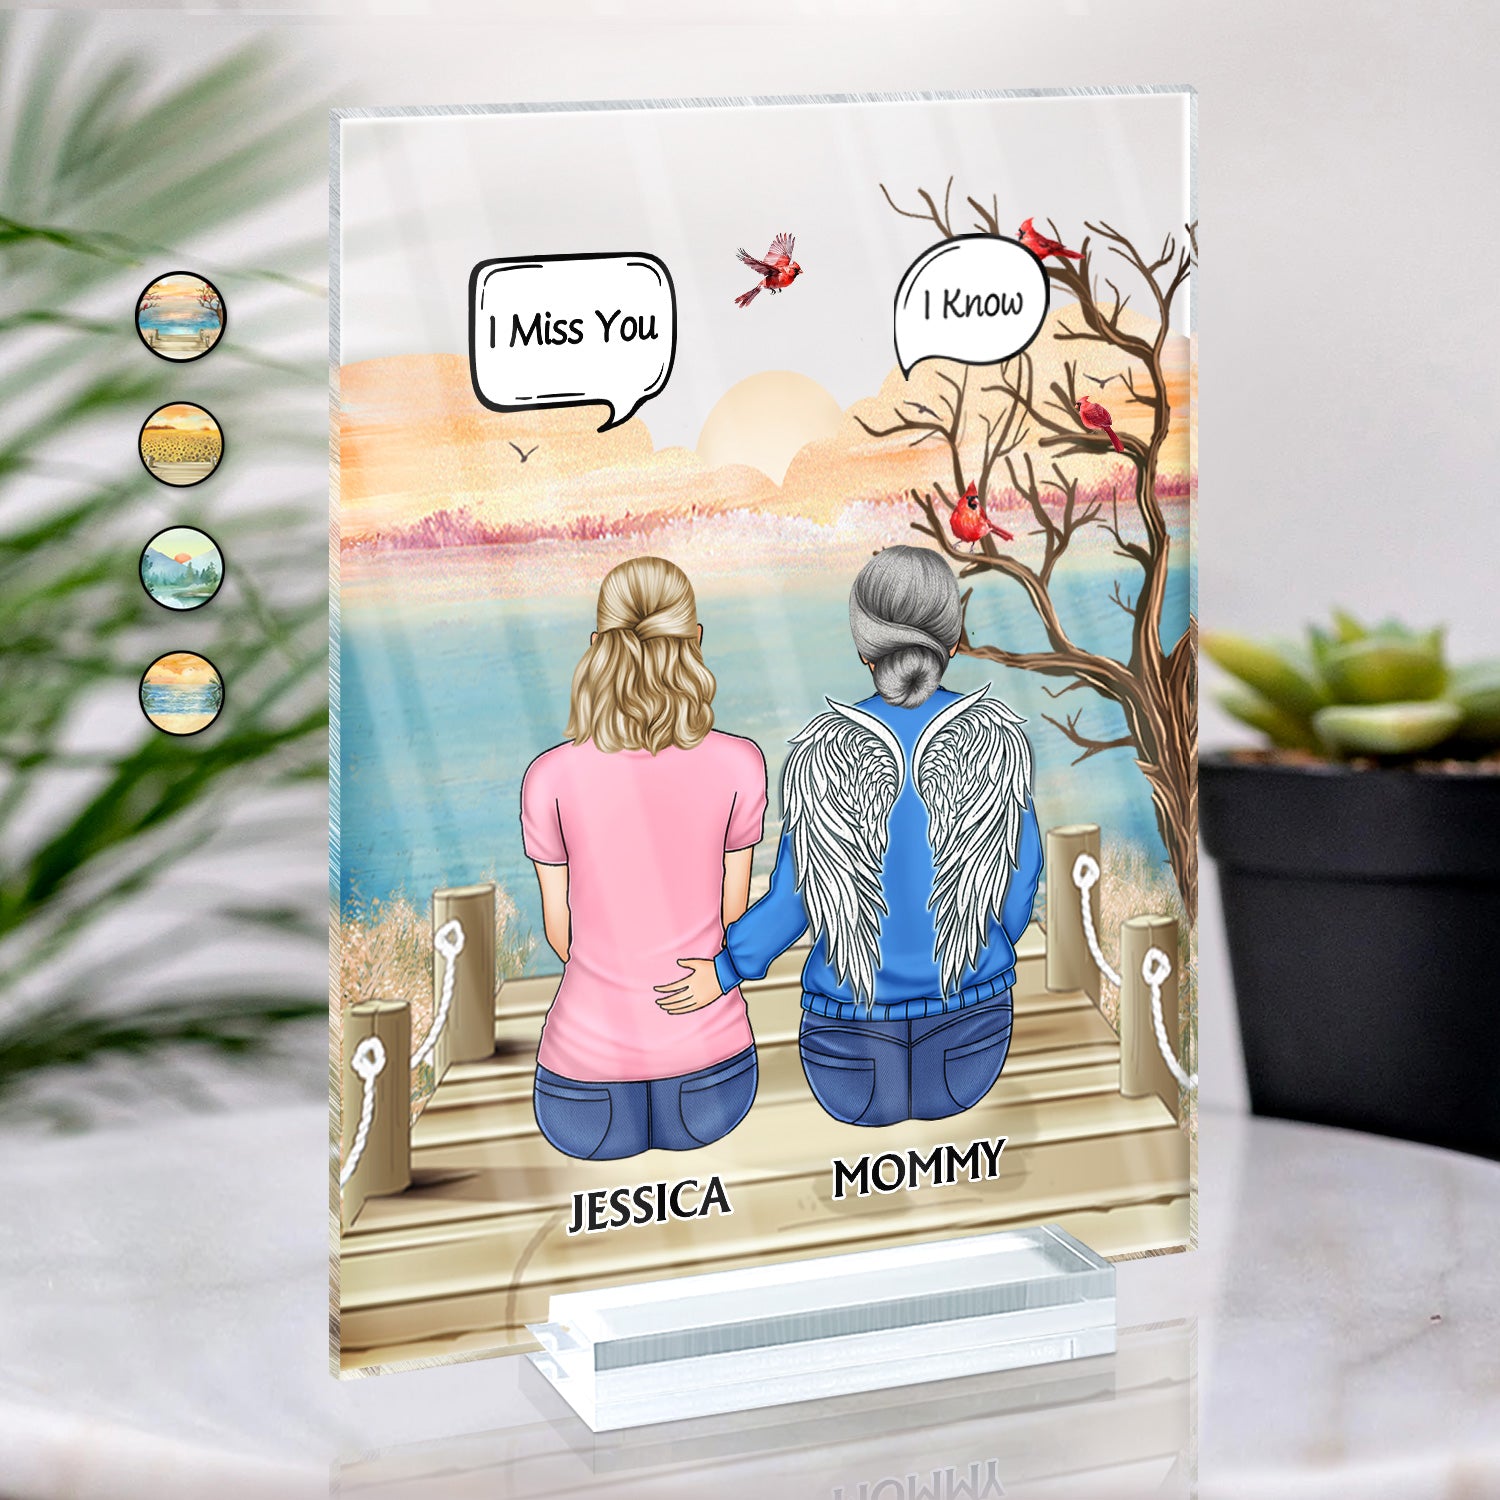 I Miss You I Know - Memorial Gift For Family, Friends, Siblings - Personalized Vertical Rectangle Acrylic Plaque